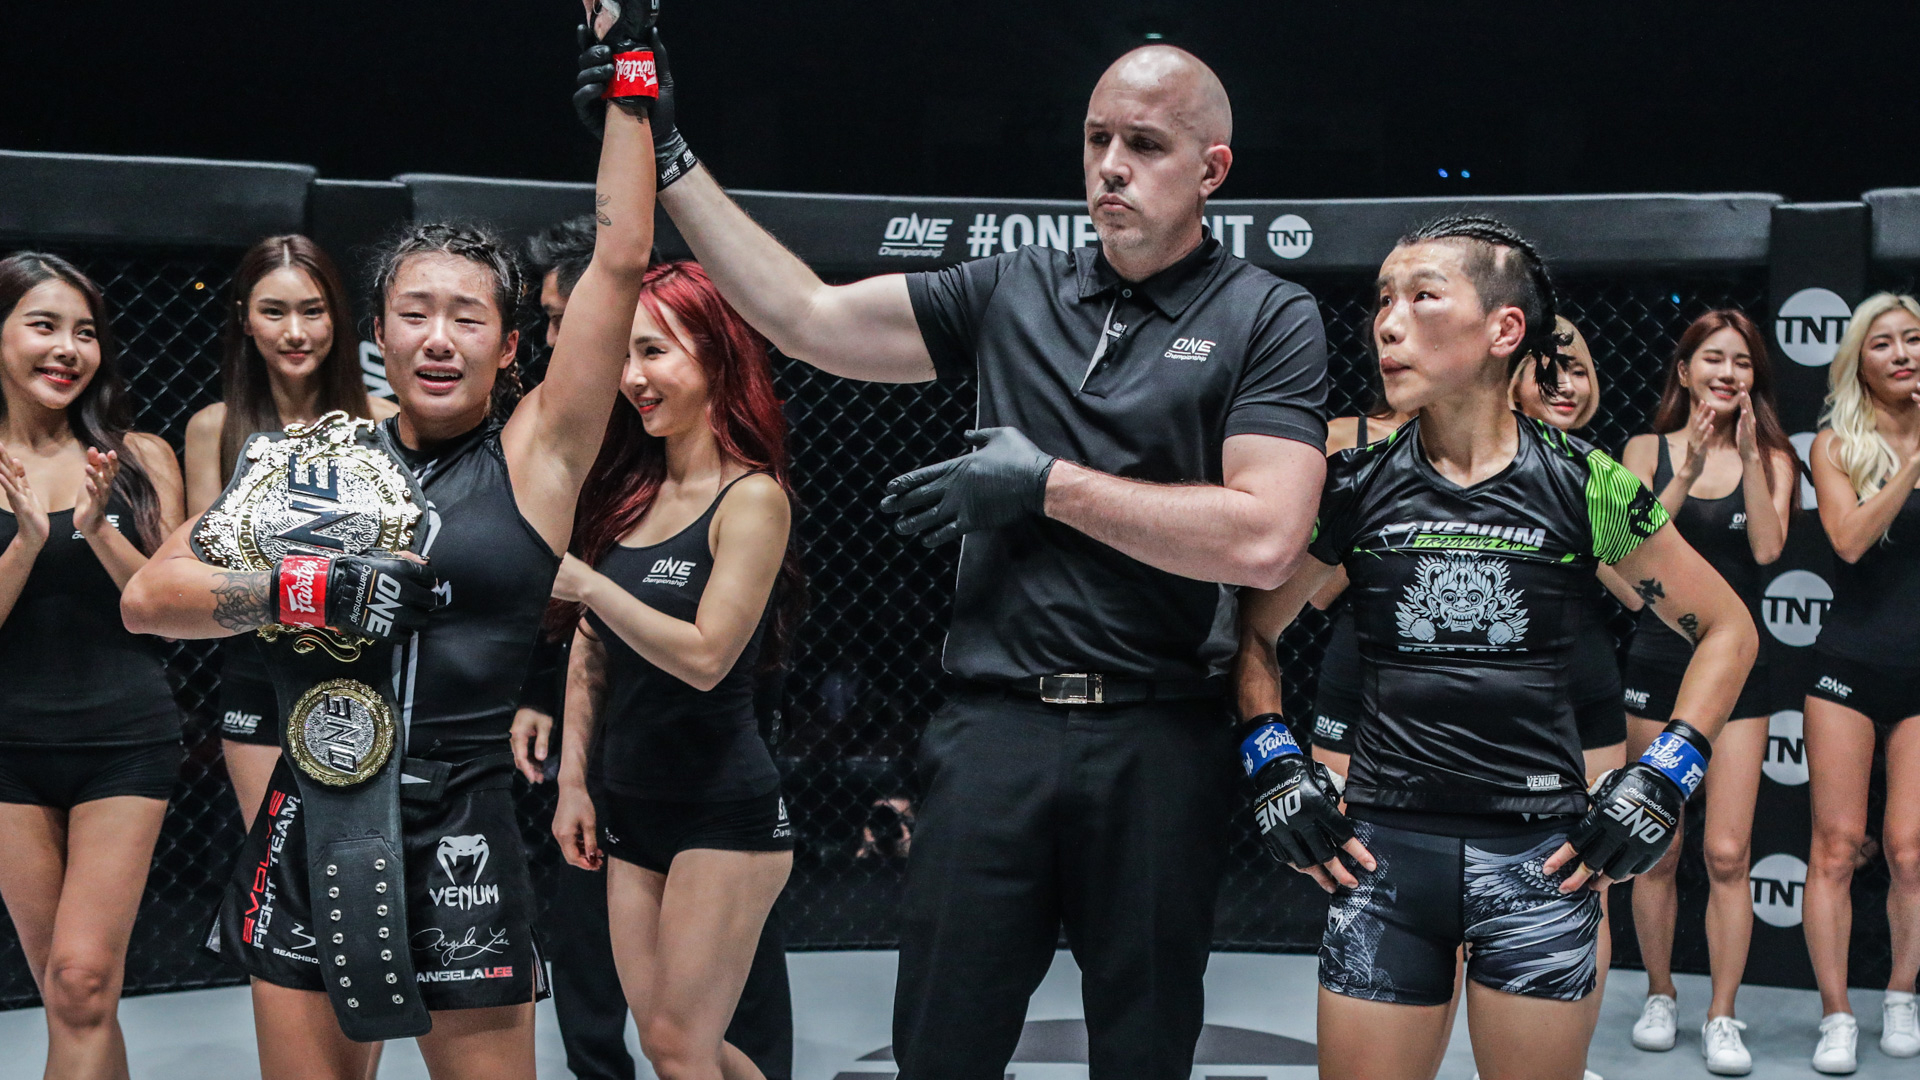 menneskelige ressourcer udrydde Flourish ONE Championship: Lee defends atomweight title in rematch with Xiong - CGTN